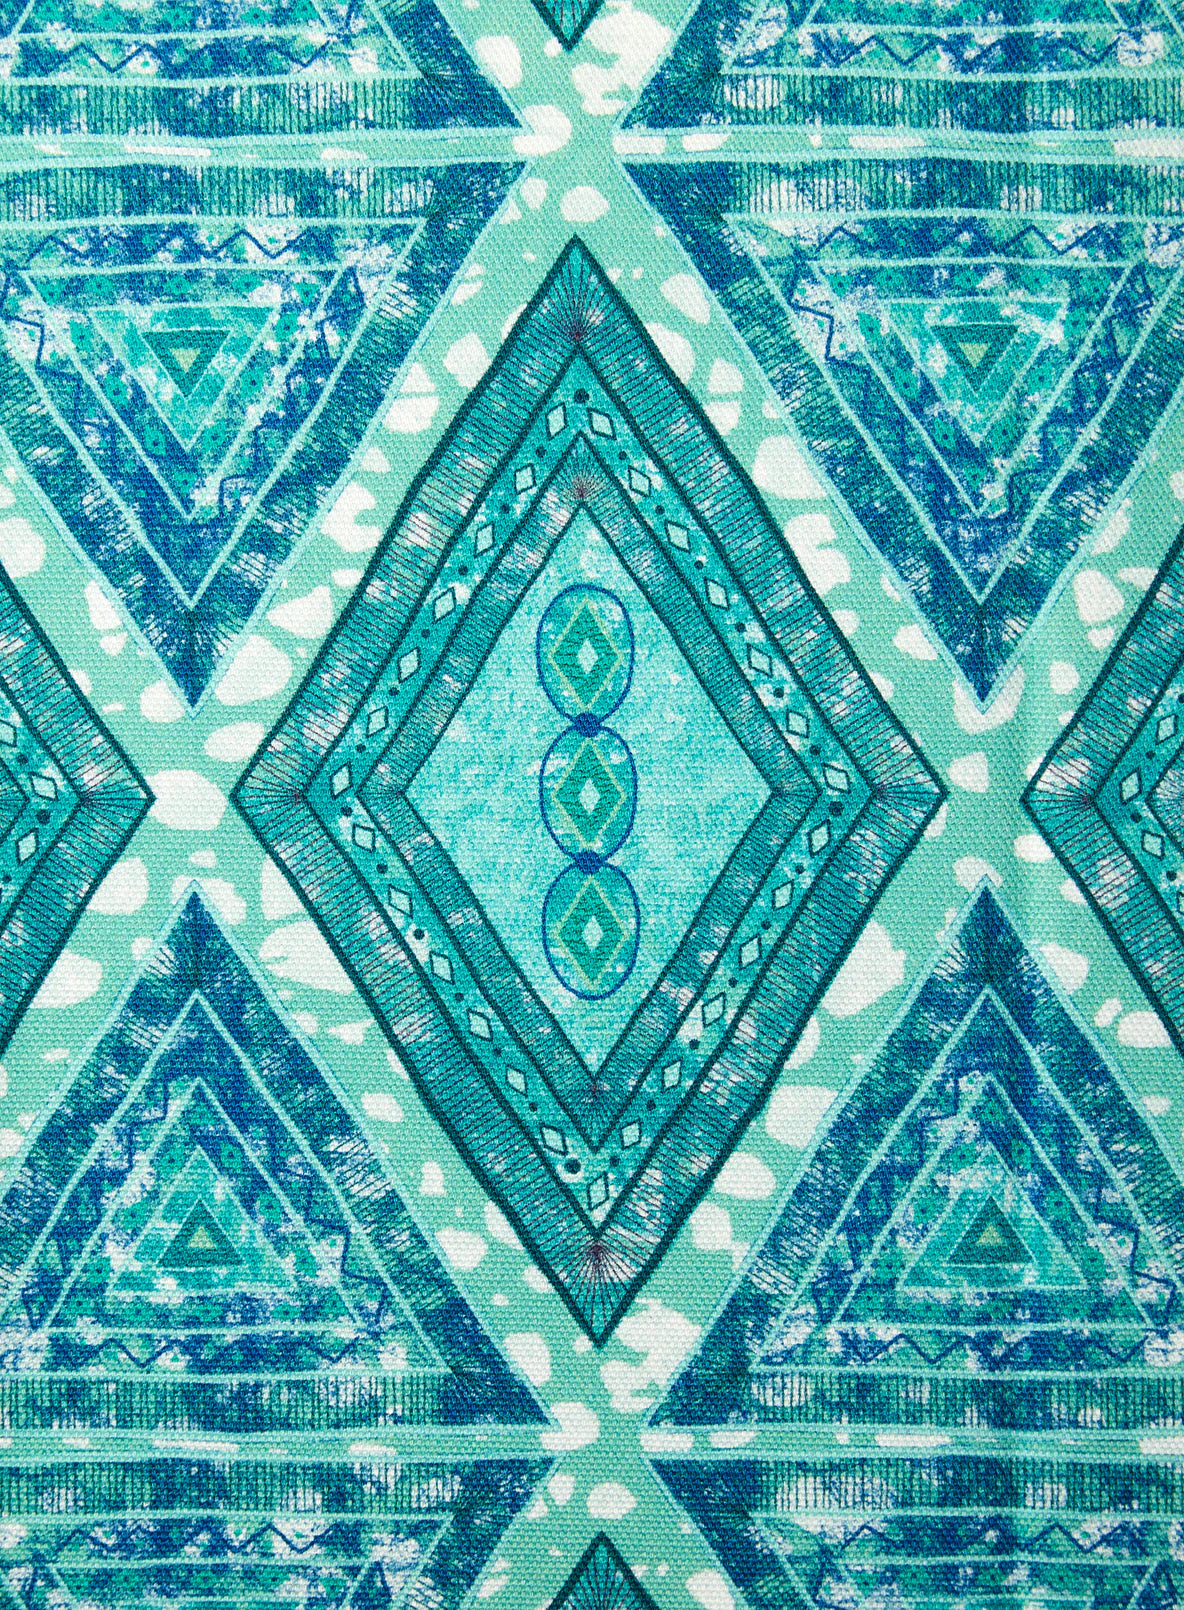 Detail of fabric in an intricate diamond grid pattern in shades of blue and turquoise.